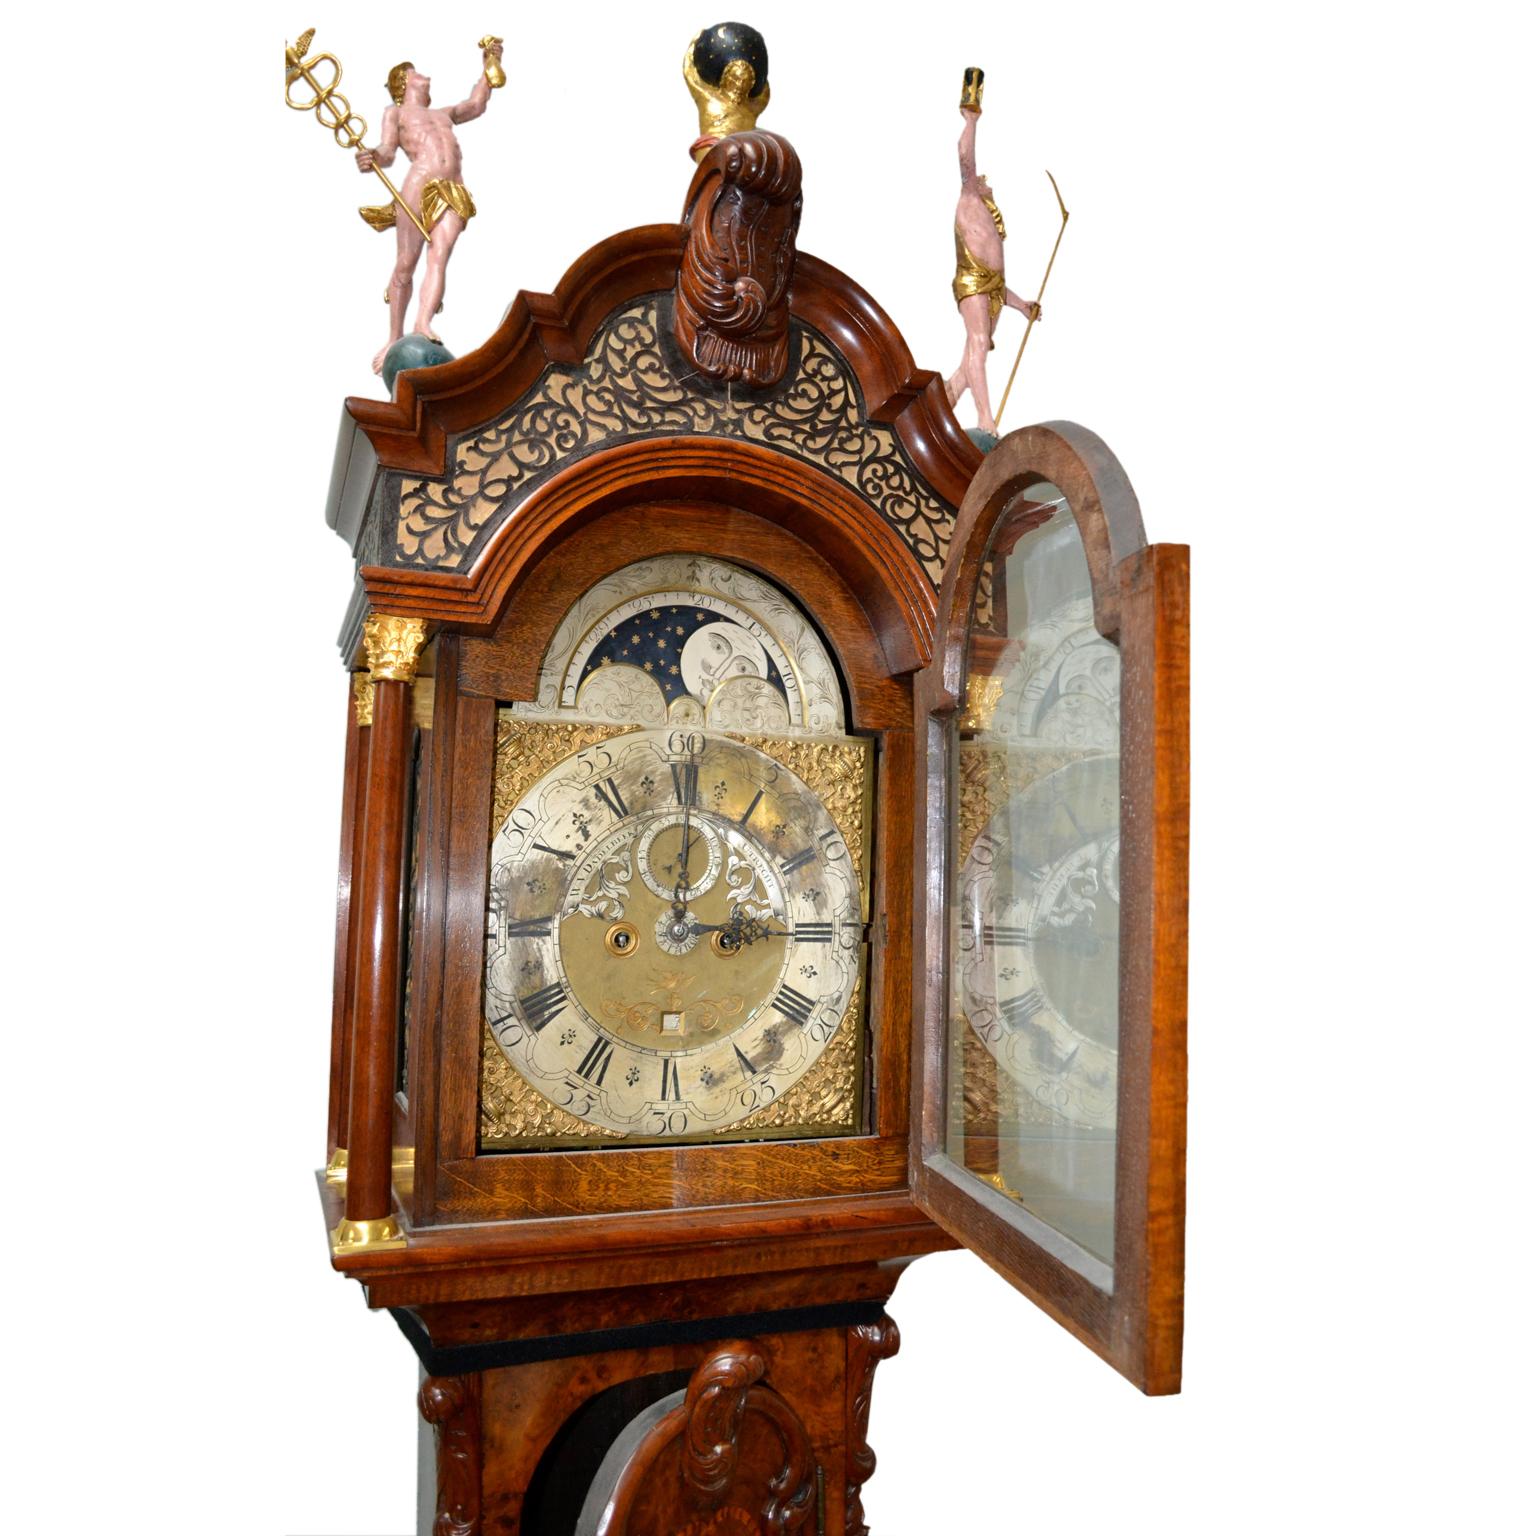 18th Century Dutch 'Utrecht' Longcase or Grandfather Clock by W.V. Dadelbeek In Good Condition For Sale In Vancouver, British Columbia